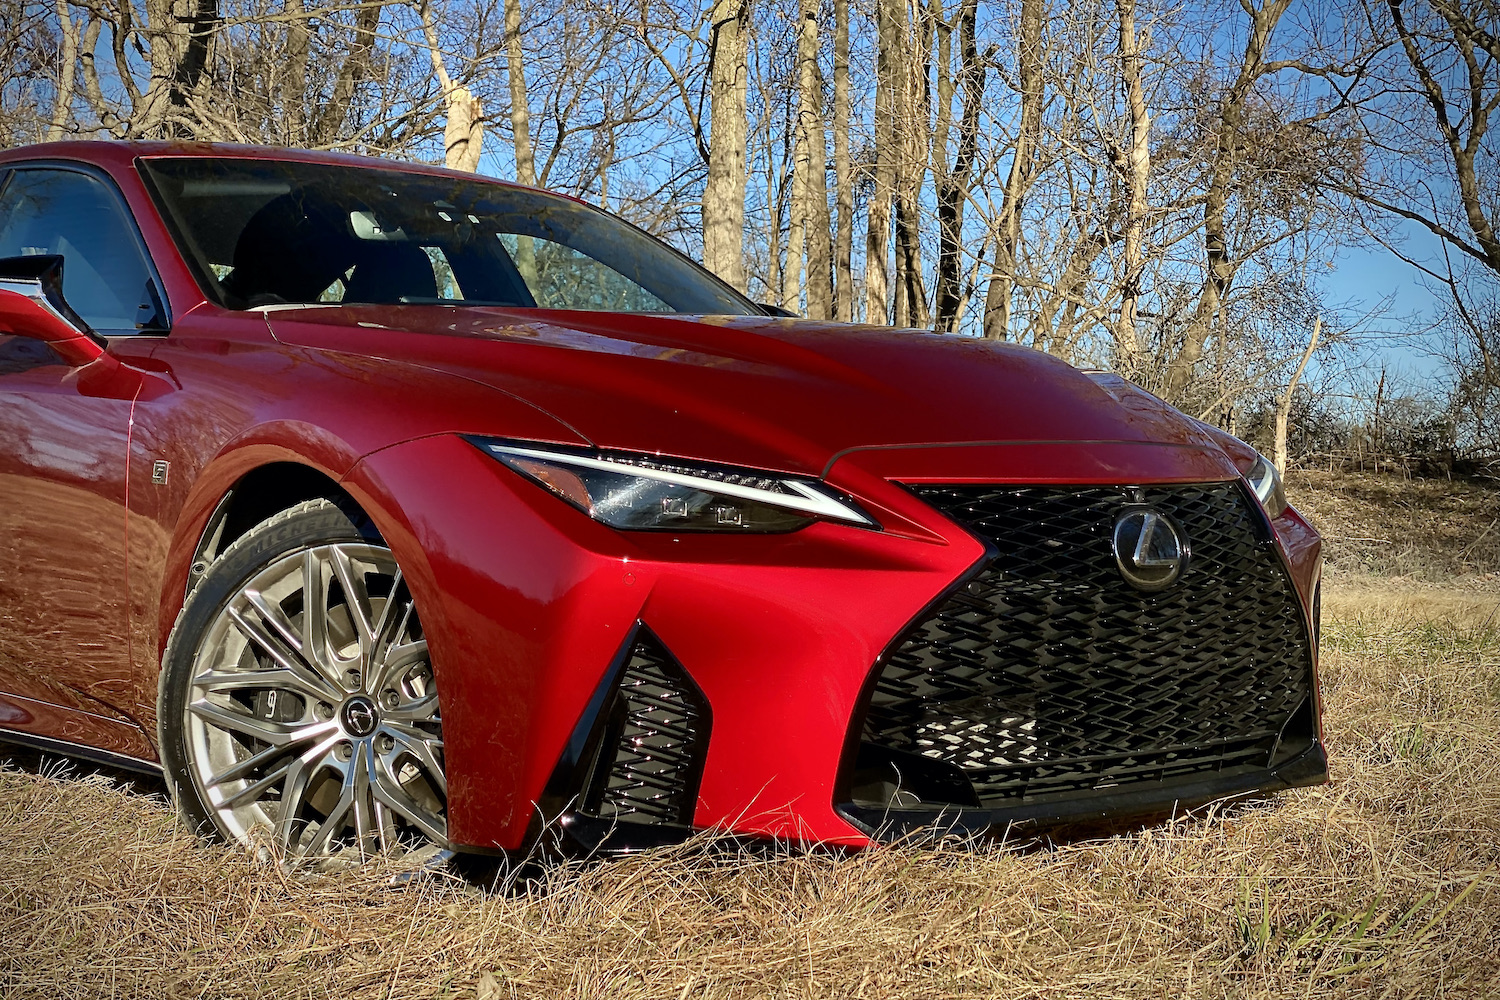 Front end close up of Lexus IS 500 from passenger's side in a grassy field.